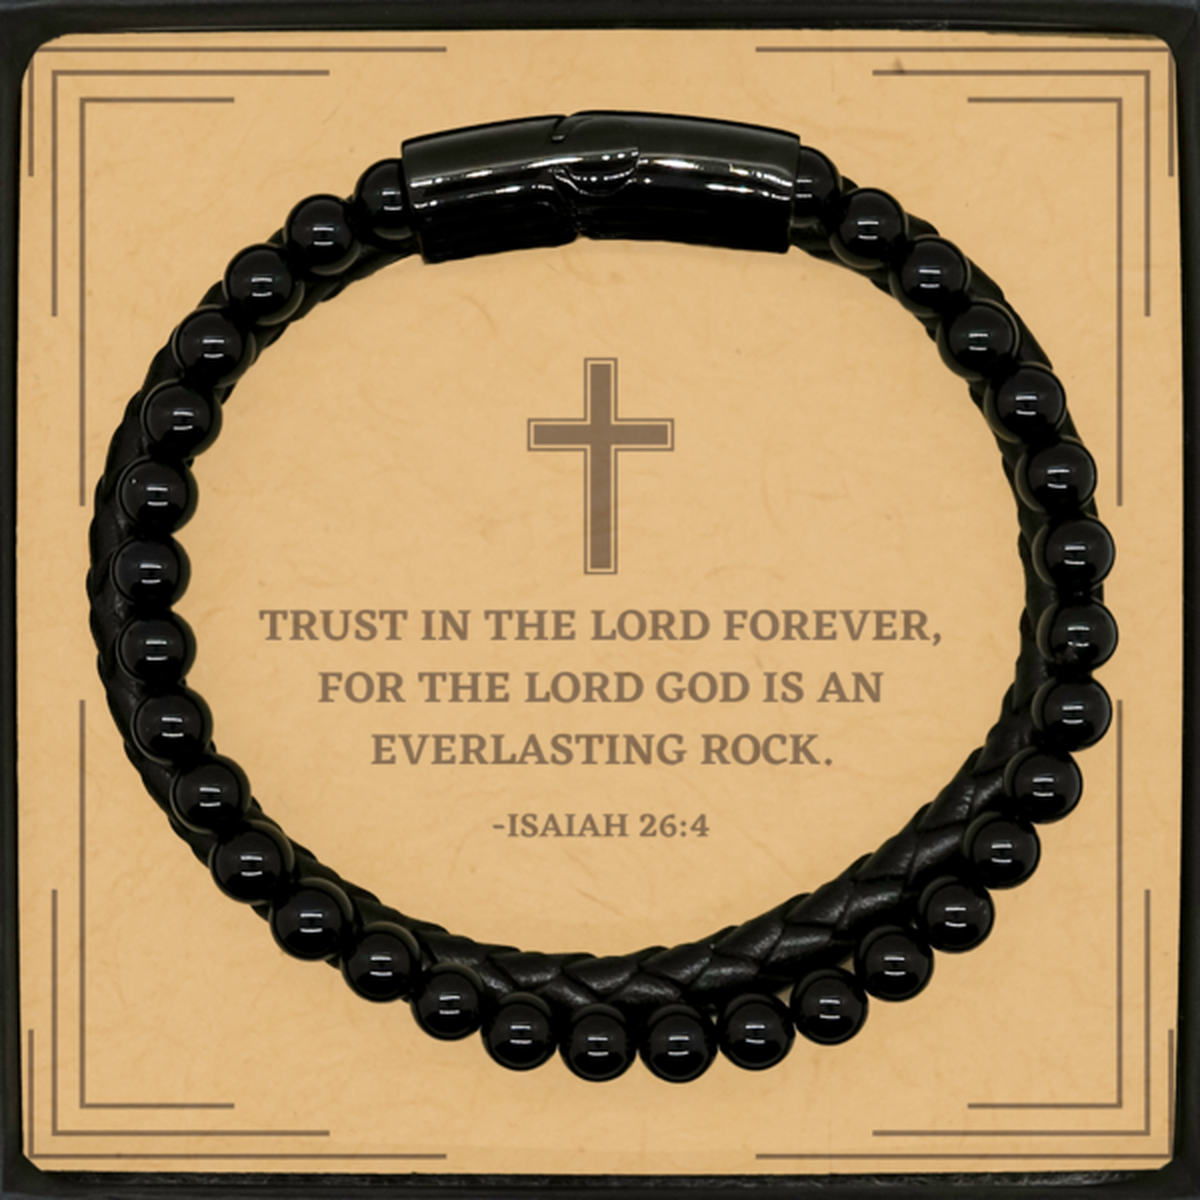 Baptism Gifts For Teenage Boys Girls, Christian Bible Verse Stone Leather Bracelet, Trust in the Lord forever, Confirmation Gifts, Bible Verse Card for Son, Godson, Grandson